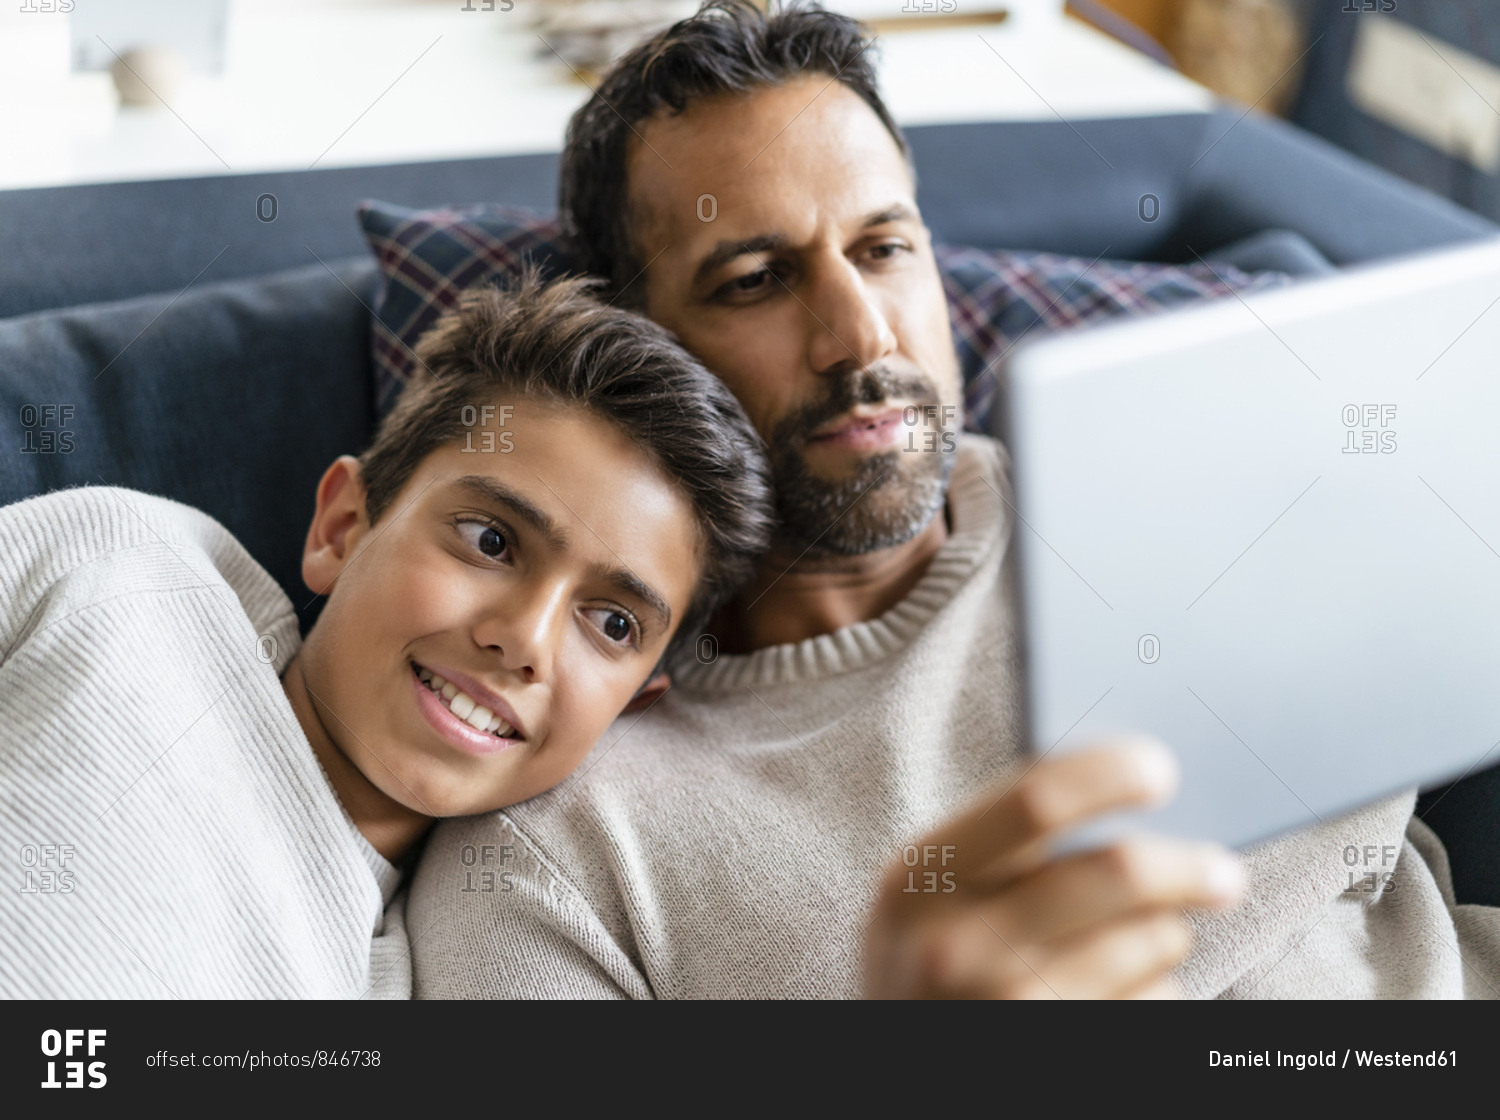 Happy father and son using tablet on couch in living room